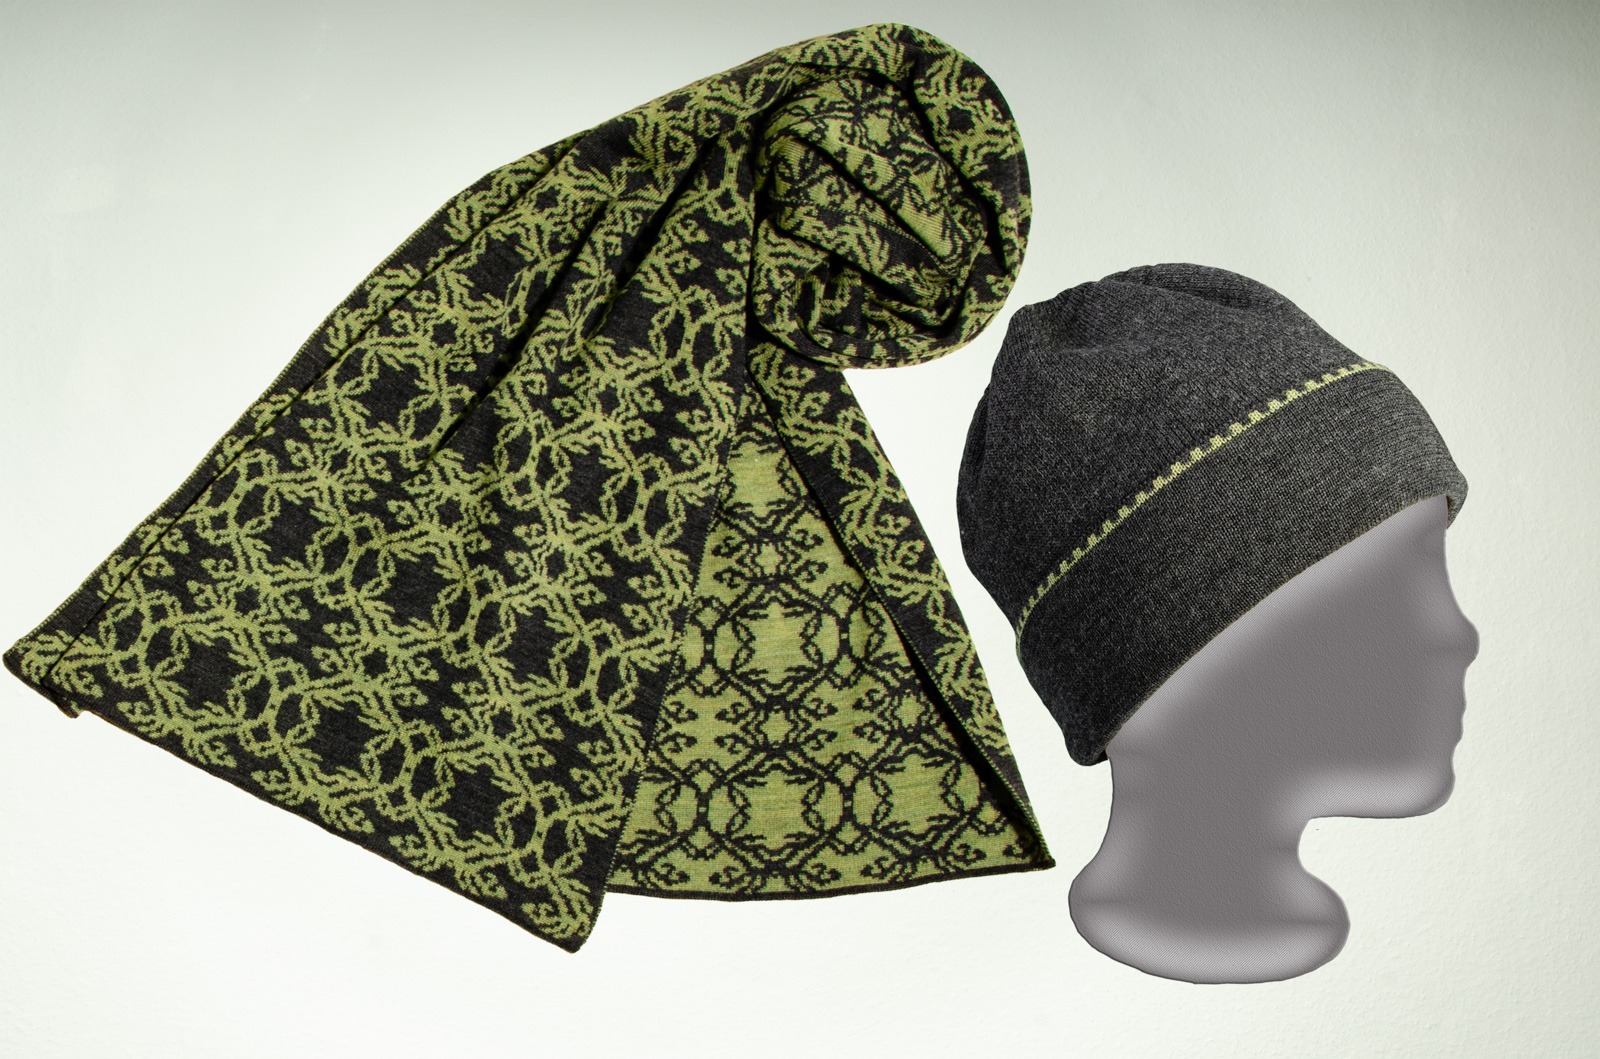 Merino scarf and wreath hat in dark gray and light green 3